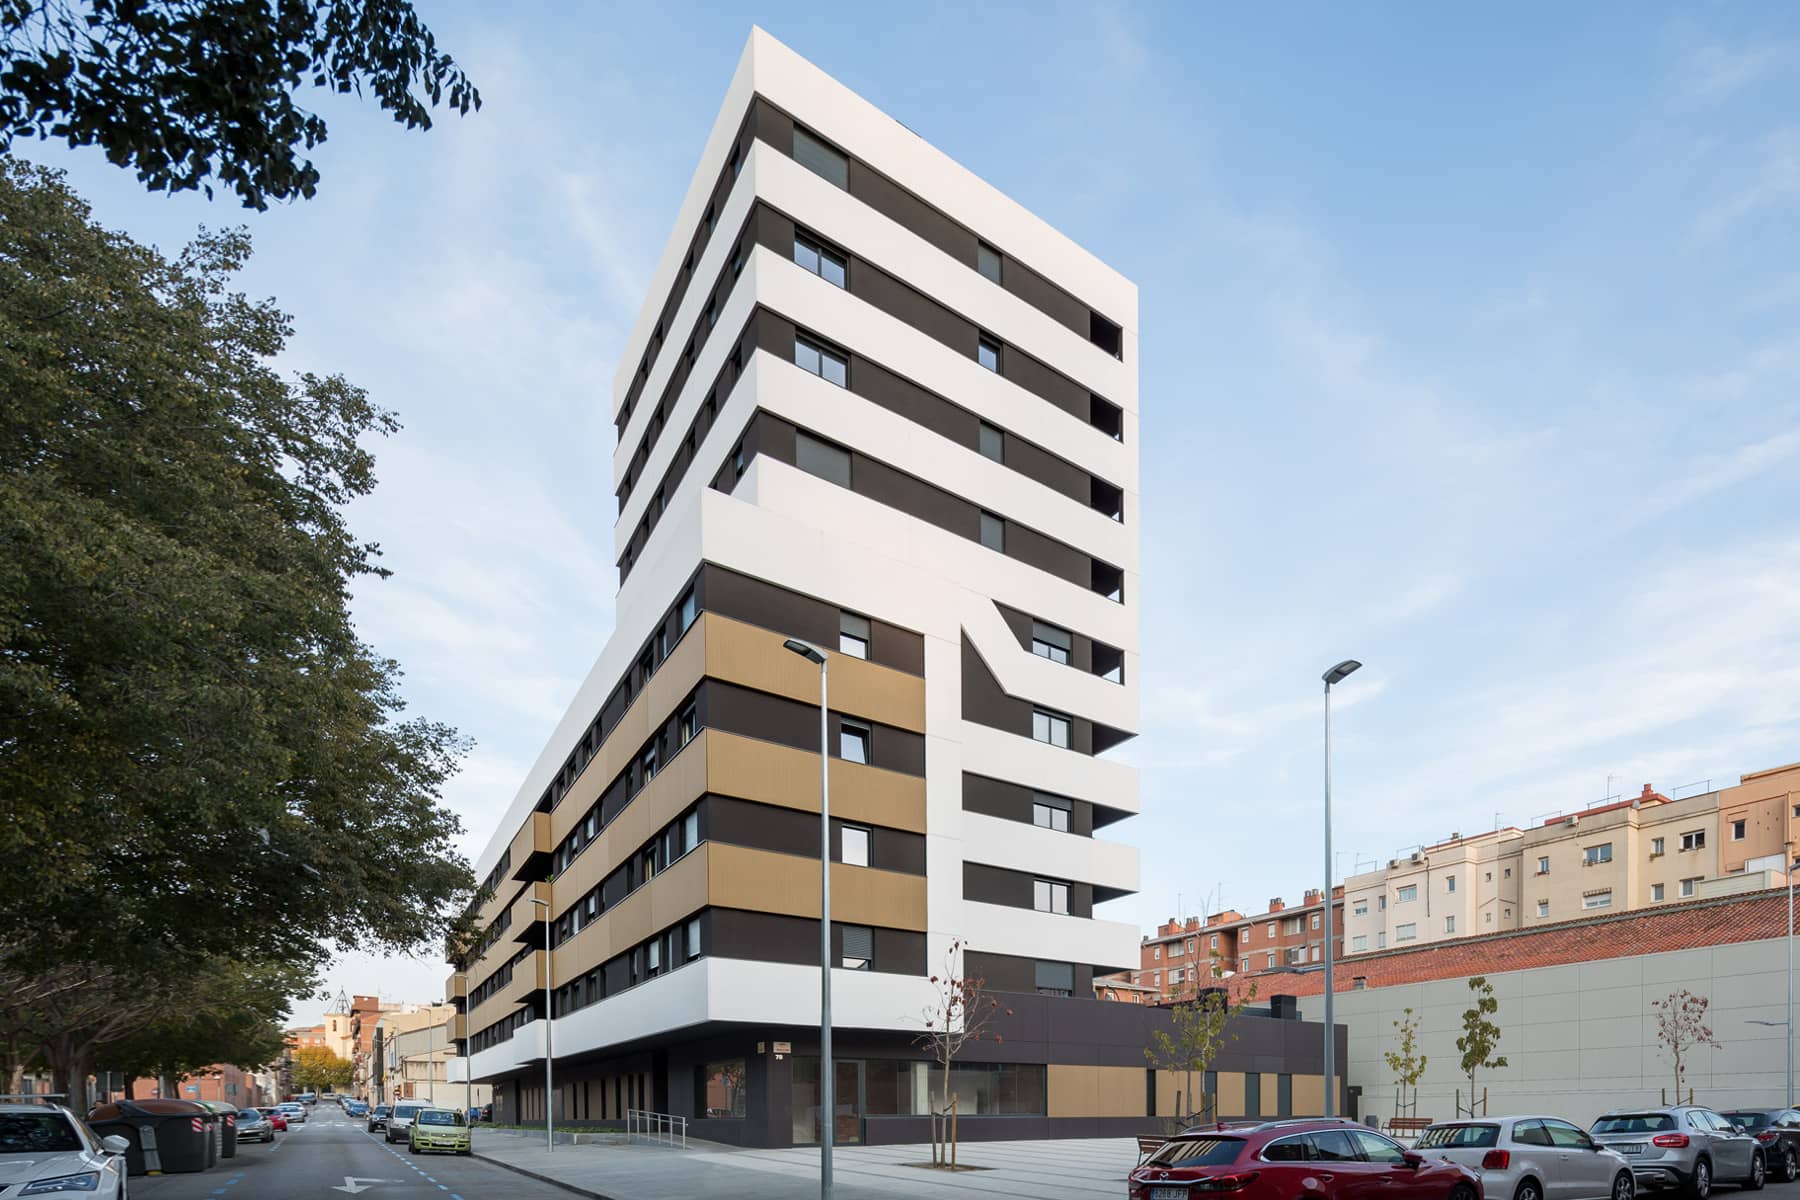 Sant Isidre is a new multi-family building developed by Sorigué - Sabadell - residential